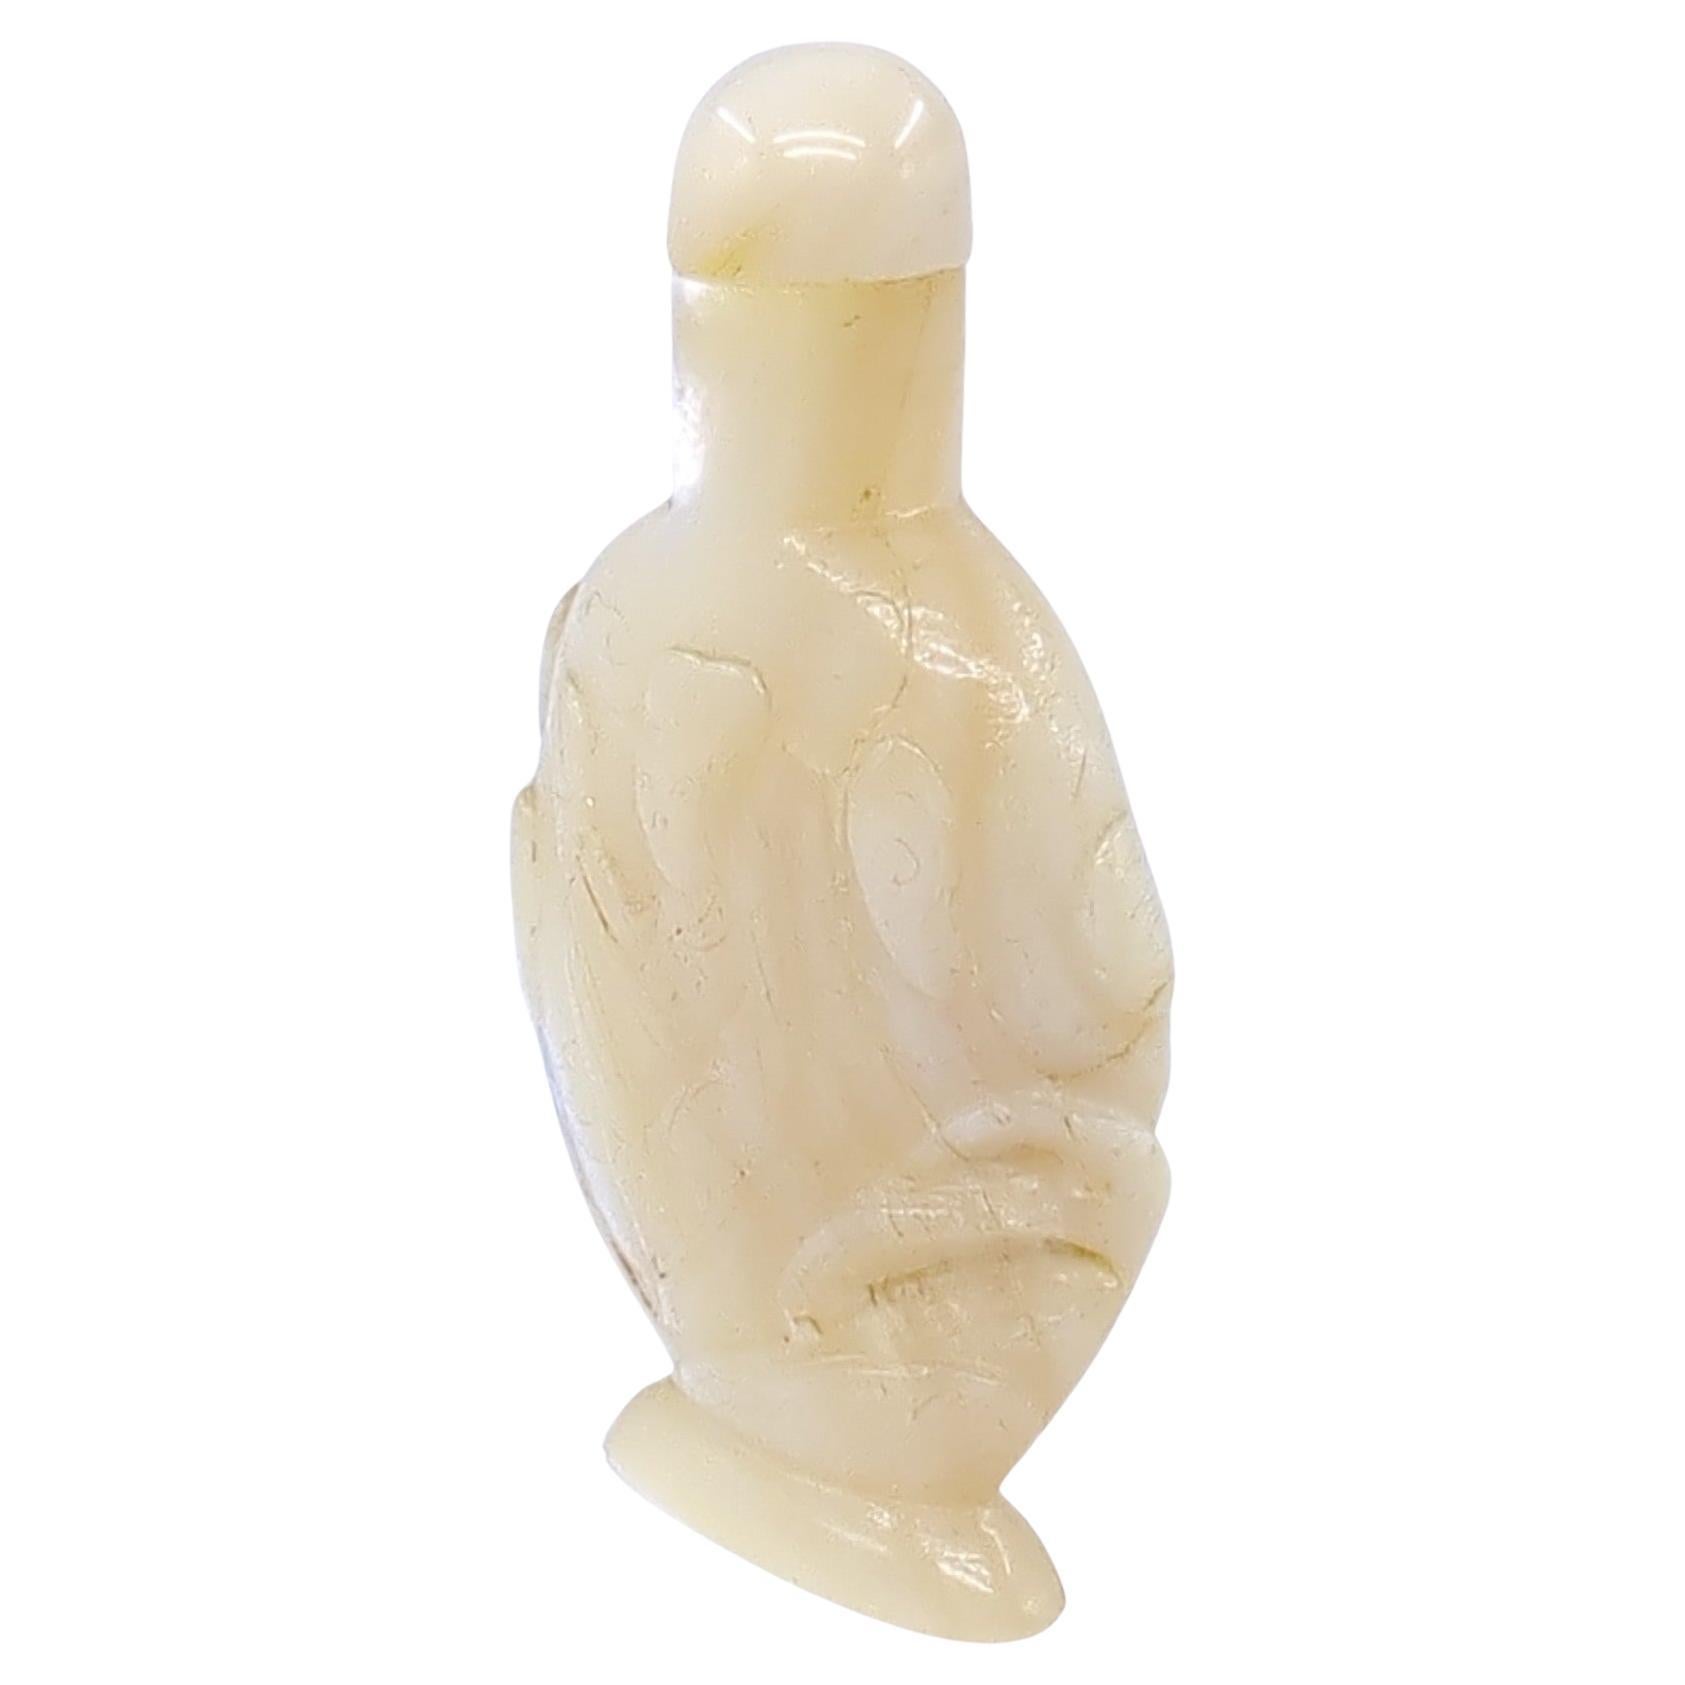 Antique Chinese Cameo Carved Mother-Of-Pearl MOP Snuff Bottle PRoC 5/6/7 period For Sale 1